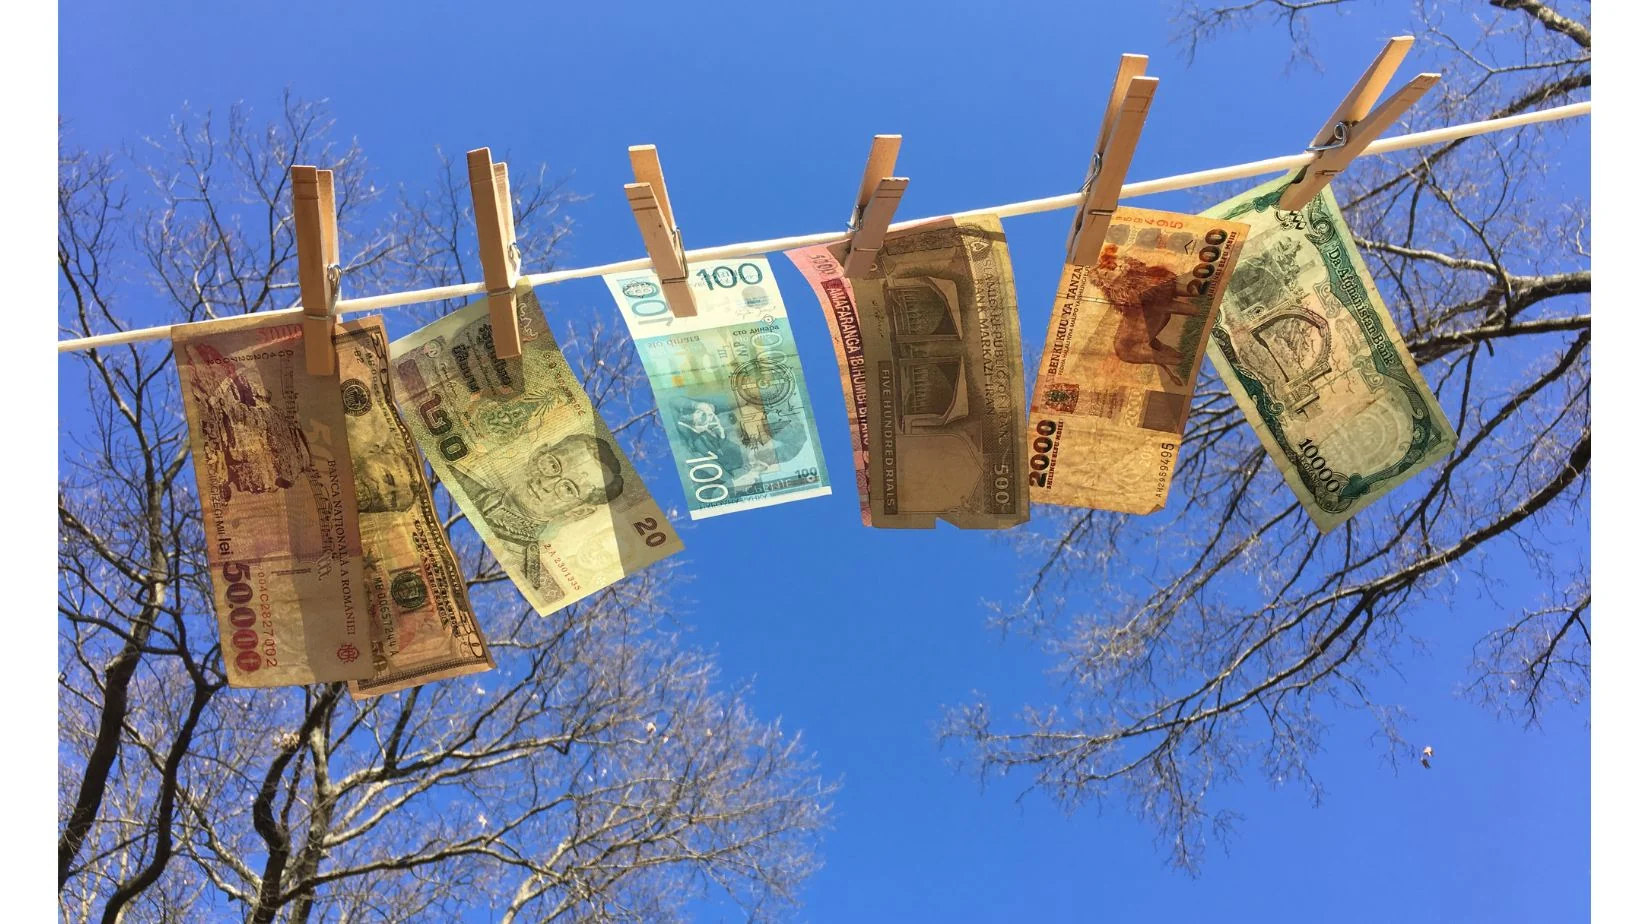 Some foreign banknotes are pegged to a rope